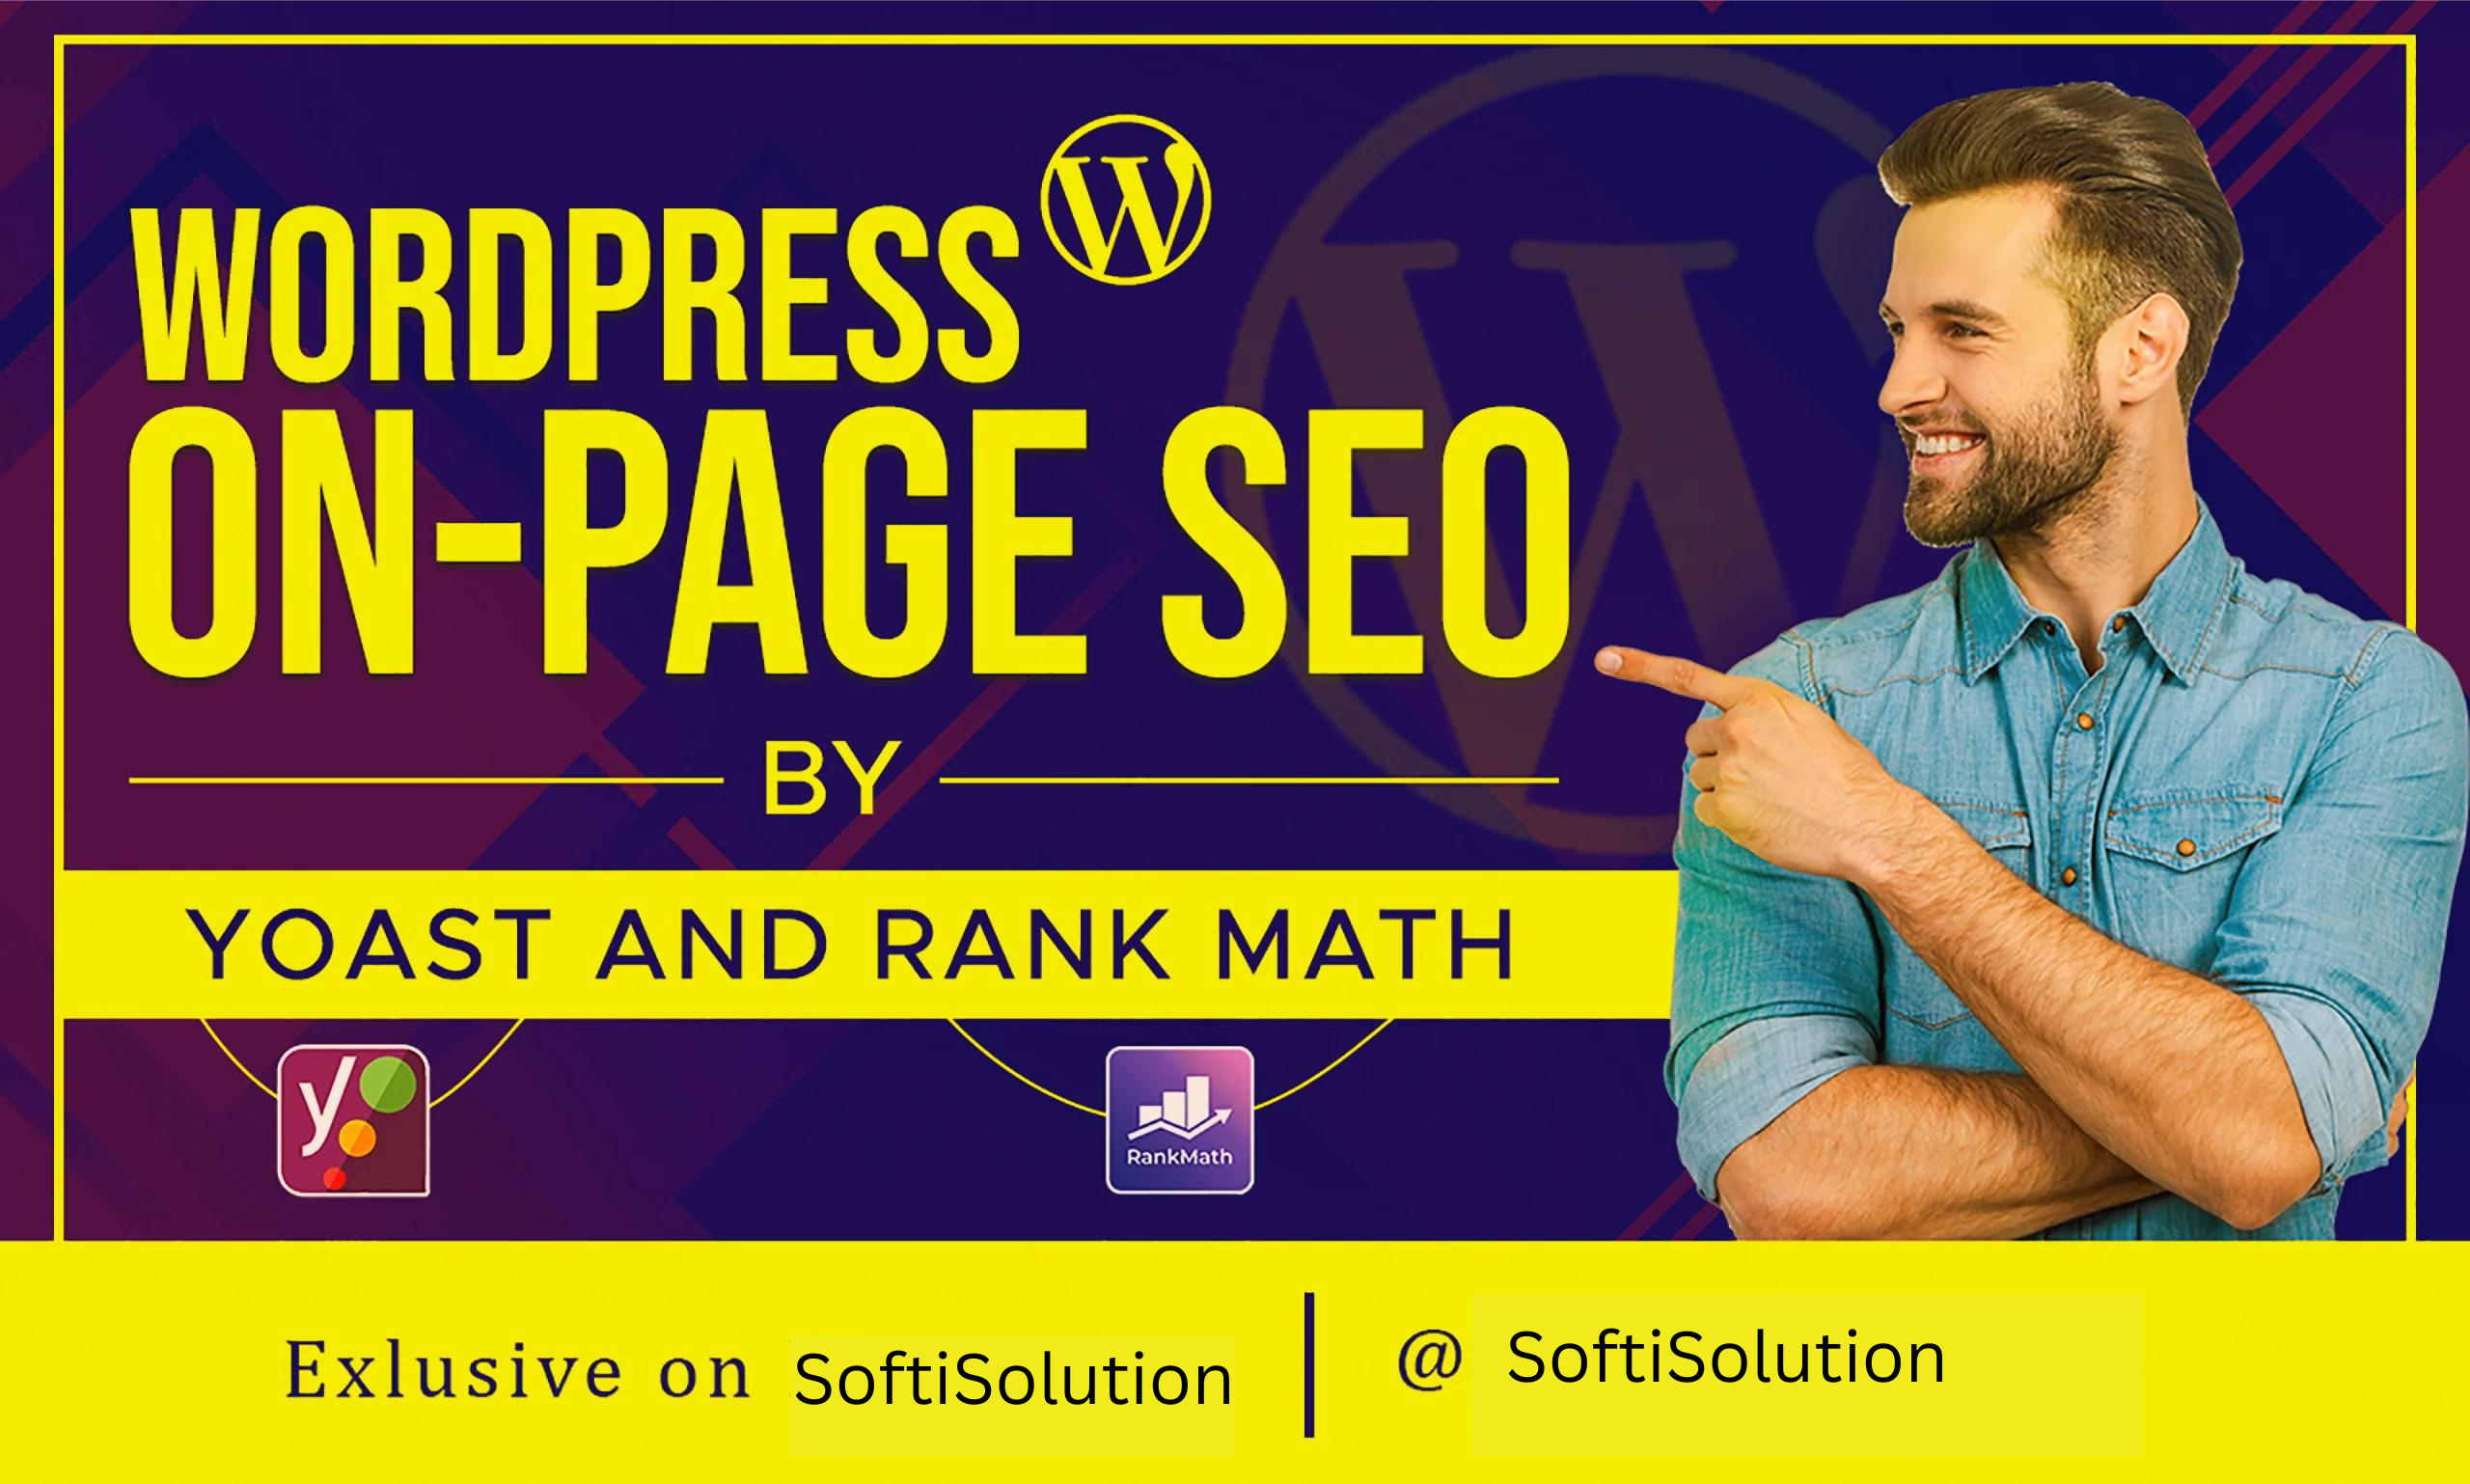 I’ll correct the on-page SEO mistakes to improve my position in Google search results.